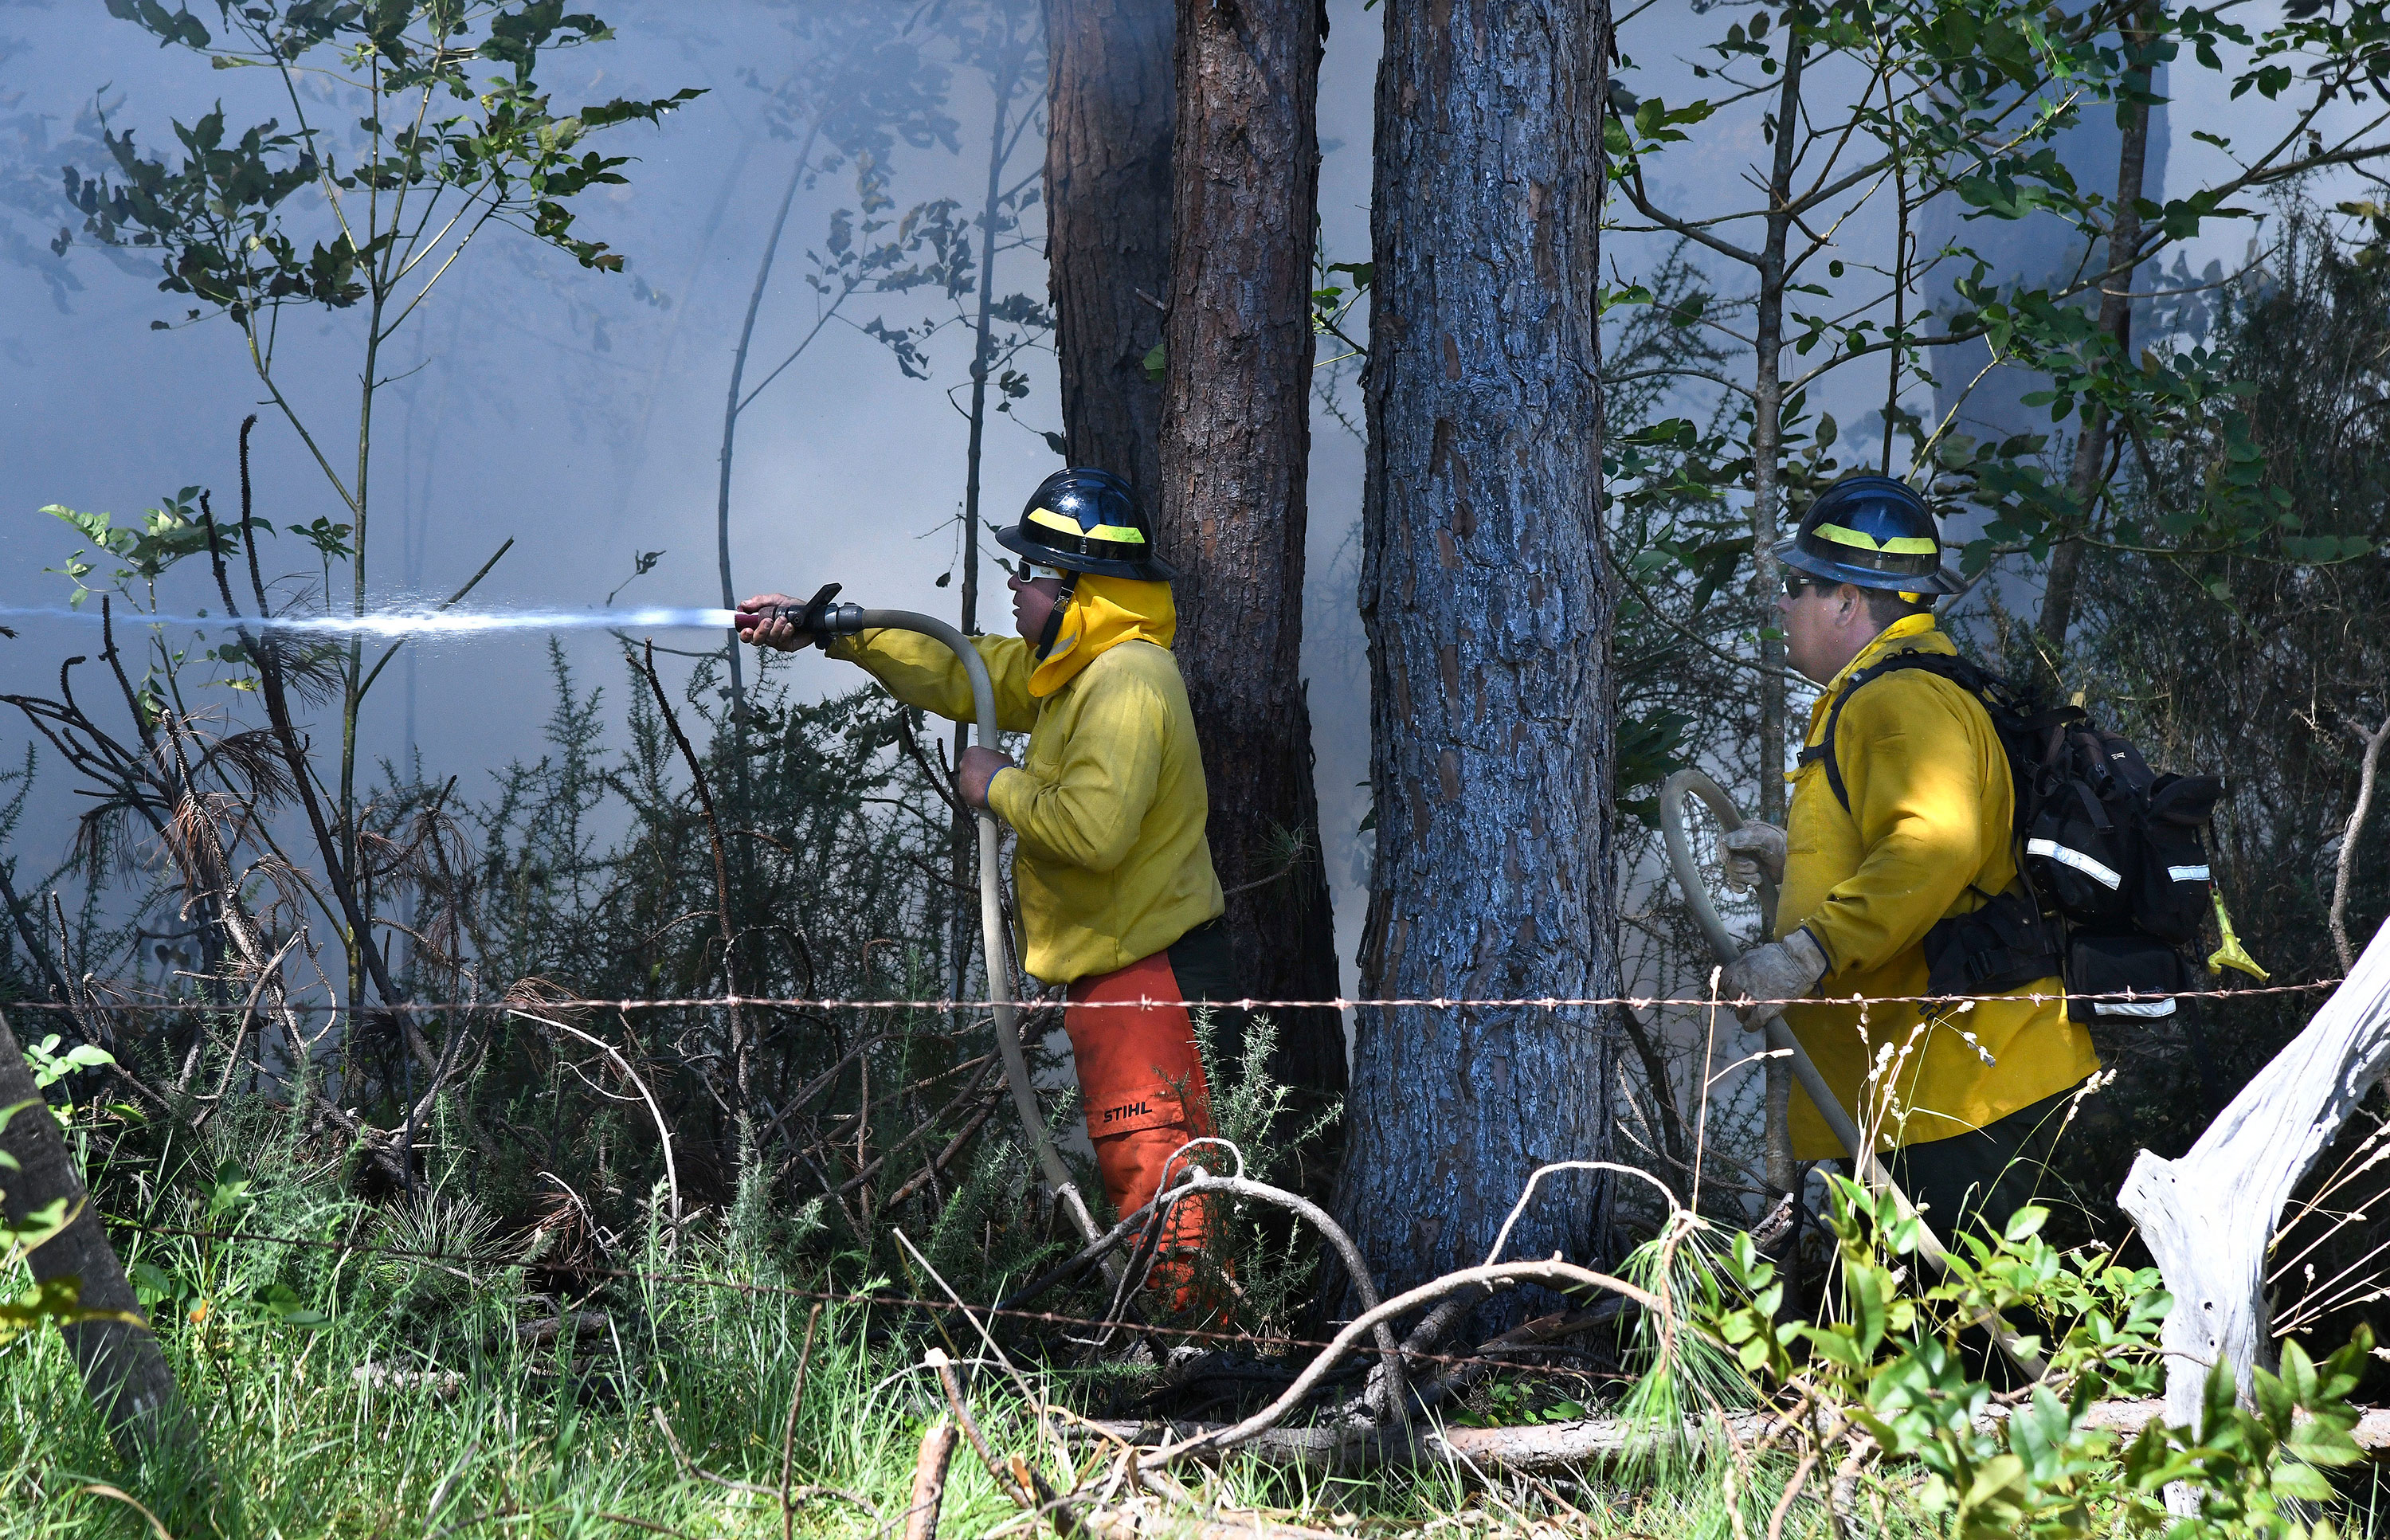 Members of a Hawaii Department of Land and Natural Resources wildland firefighting crew on Maui battle a fire in Kula, Hawaii on August 8.